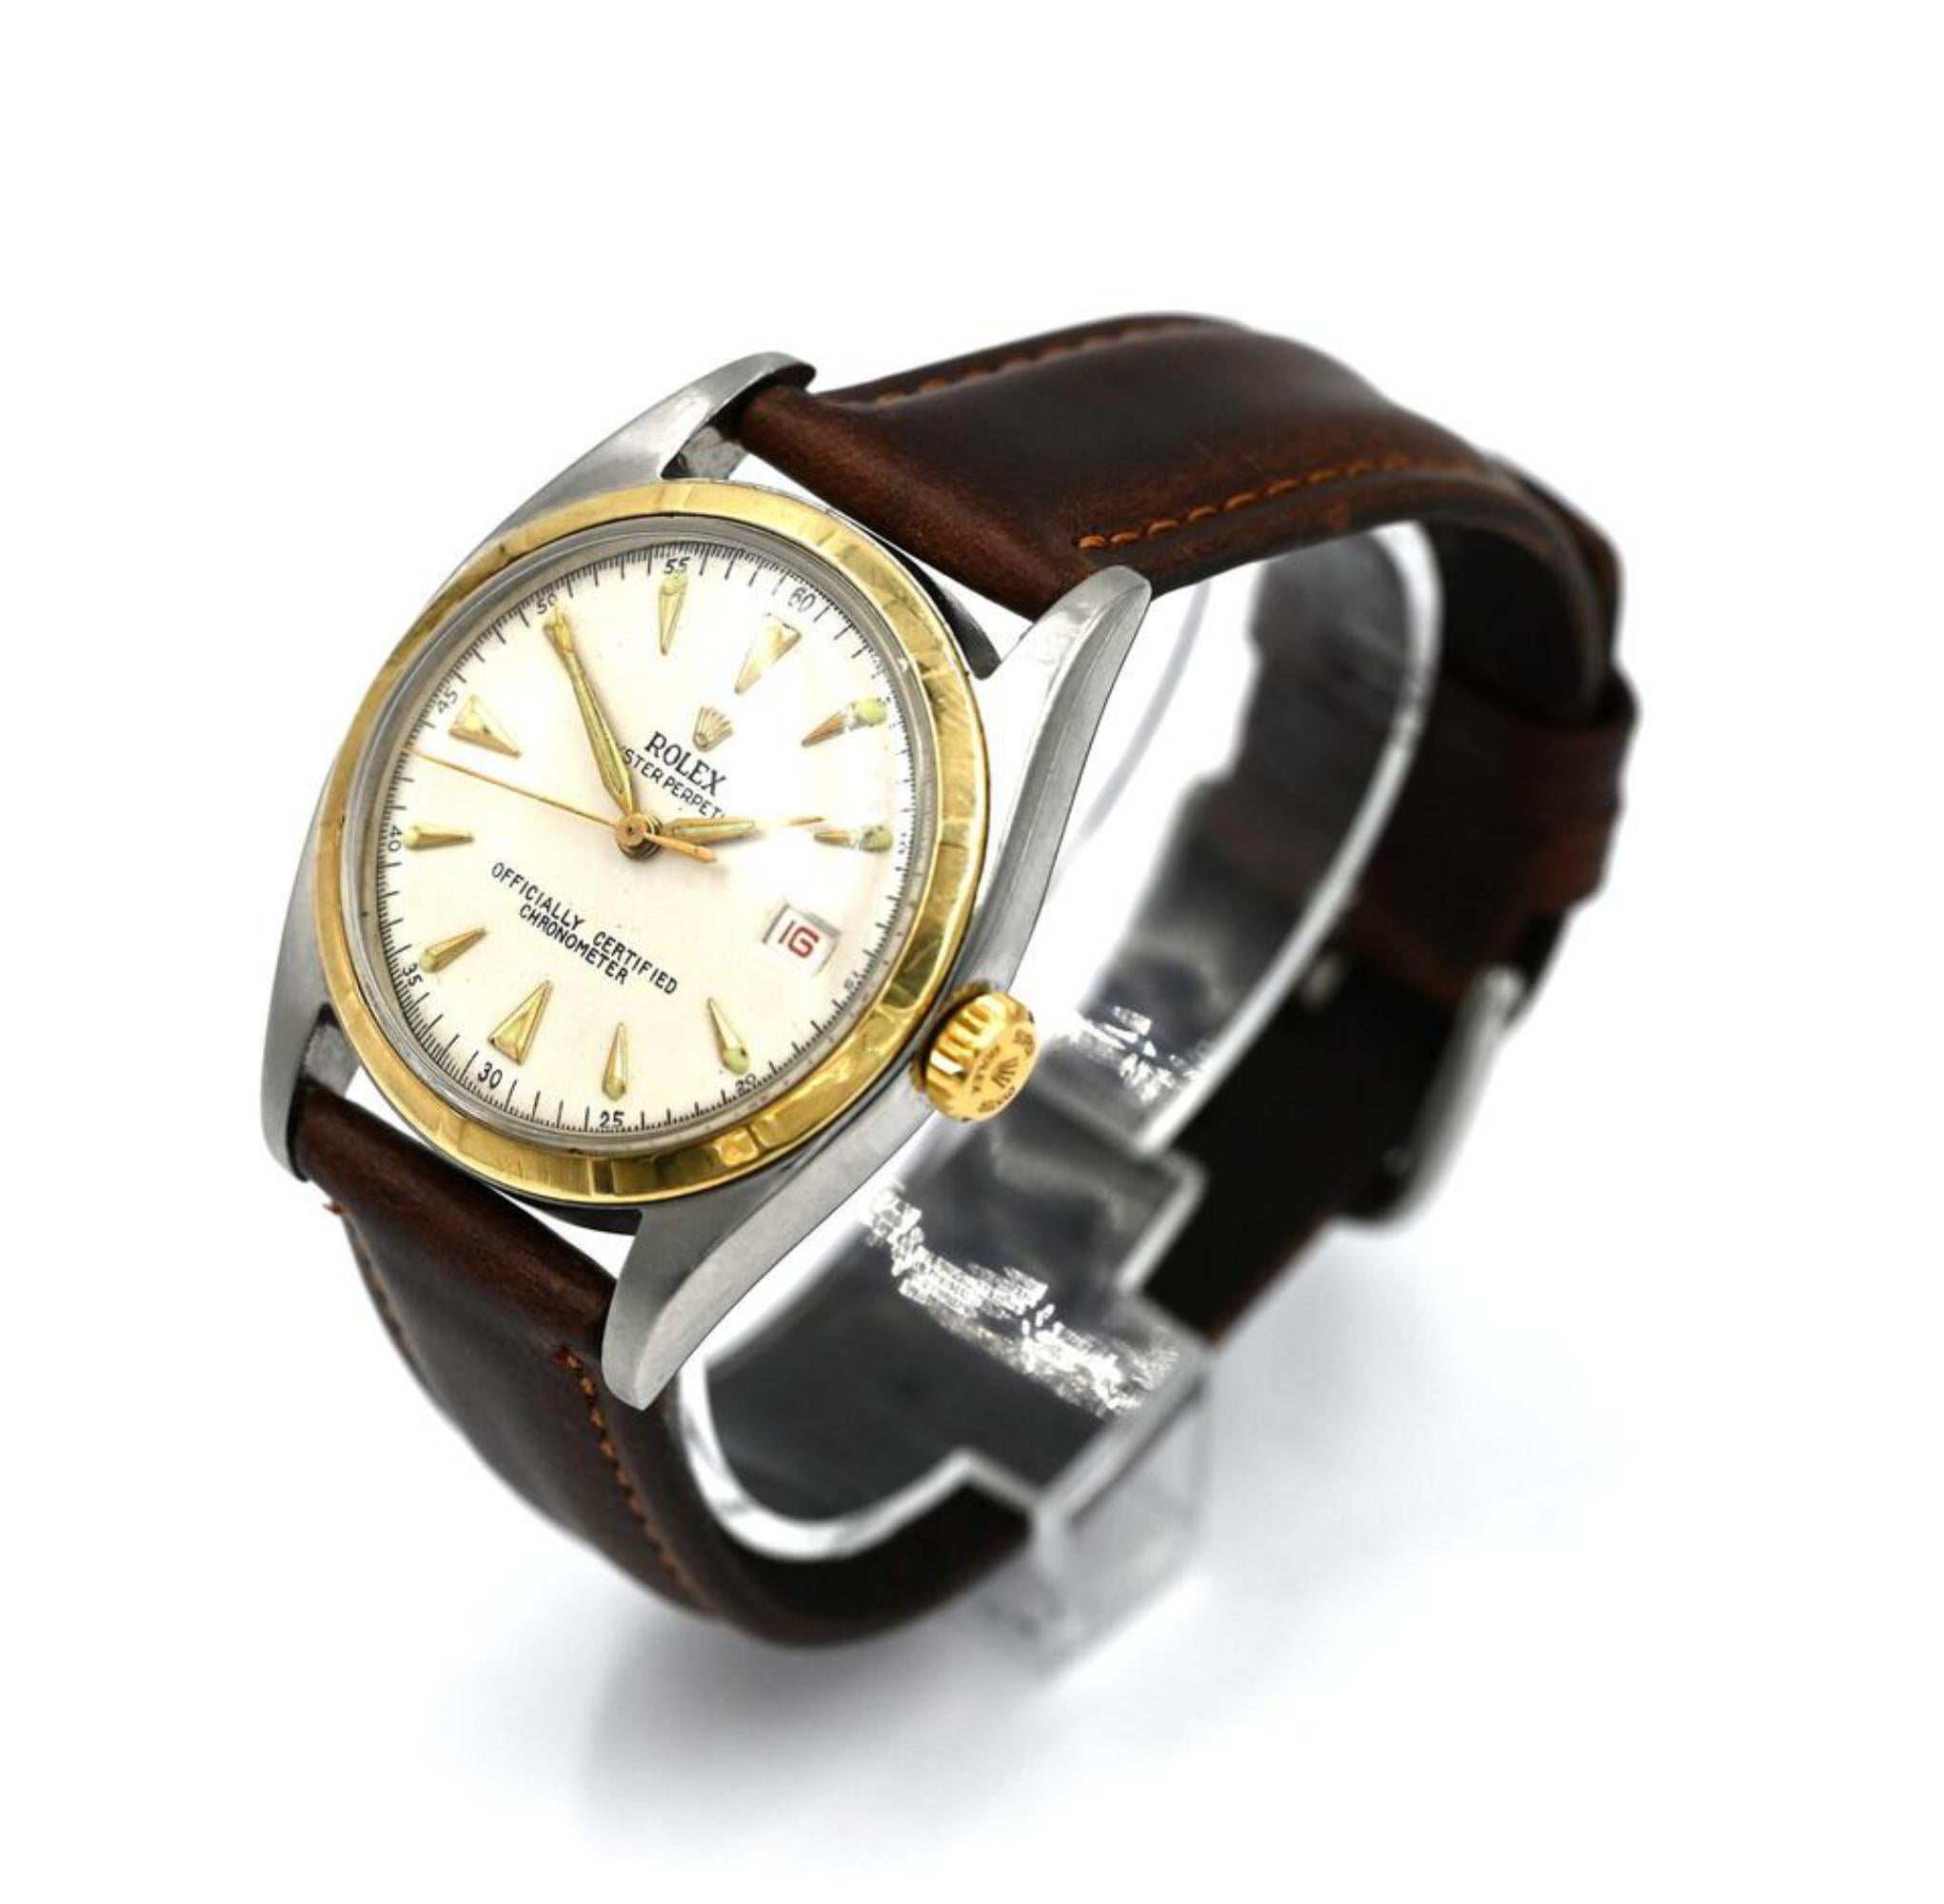 Rolex c1953 14k Oyster Perpetual Datejust Ref 6105 Bubble Back Watch 16r222s For Sale 3